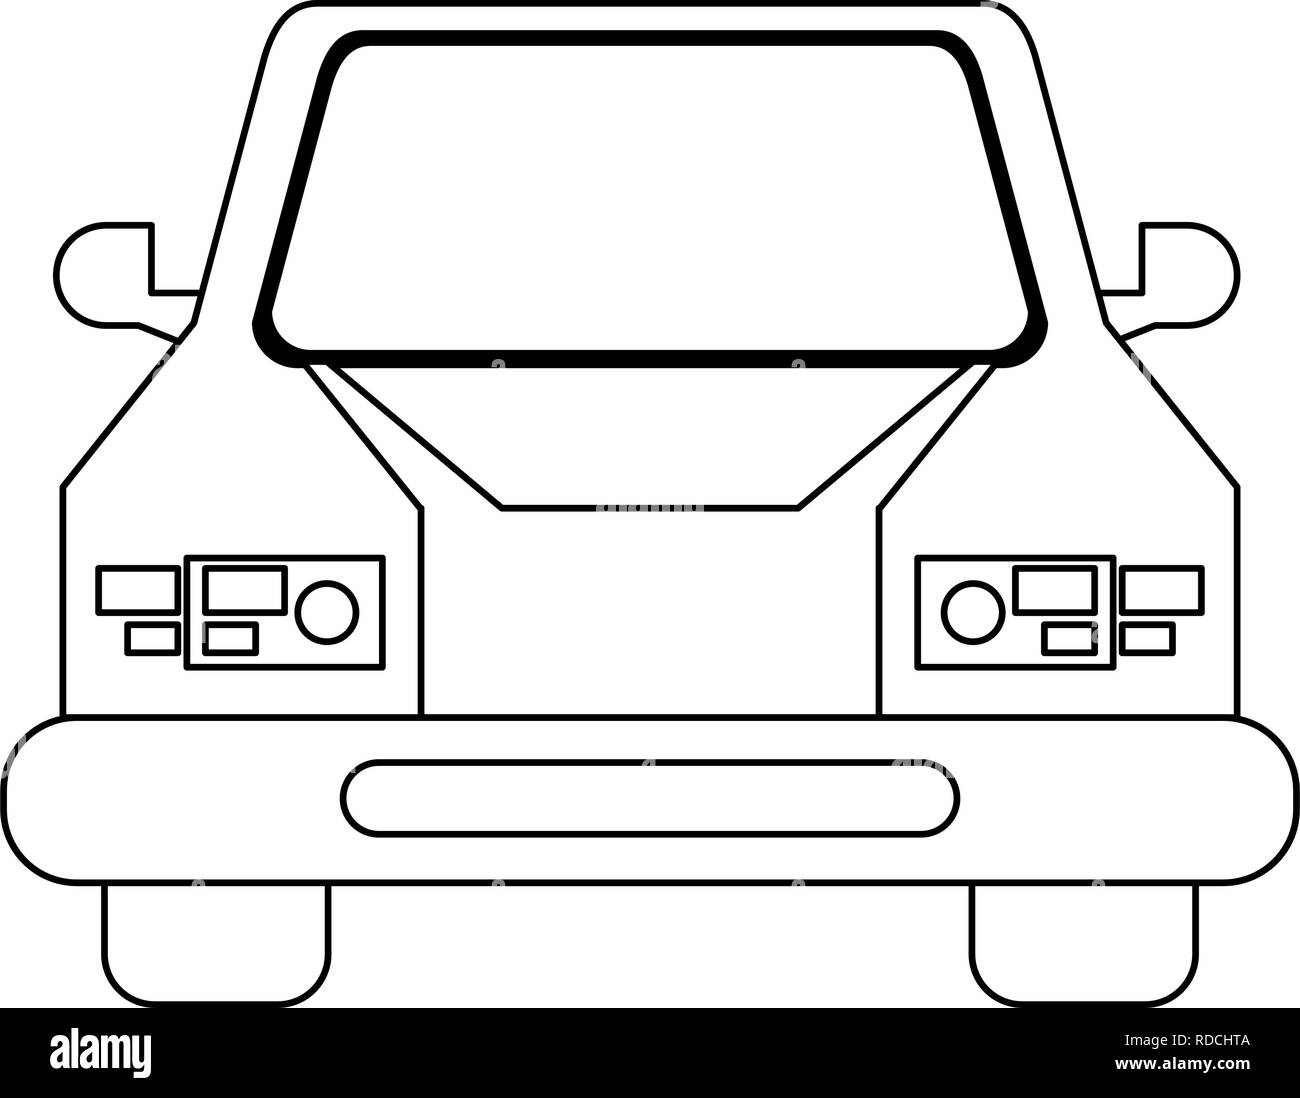 Car front view vehicle Stock Vector